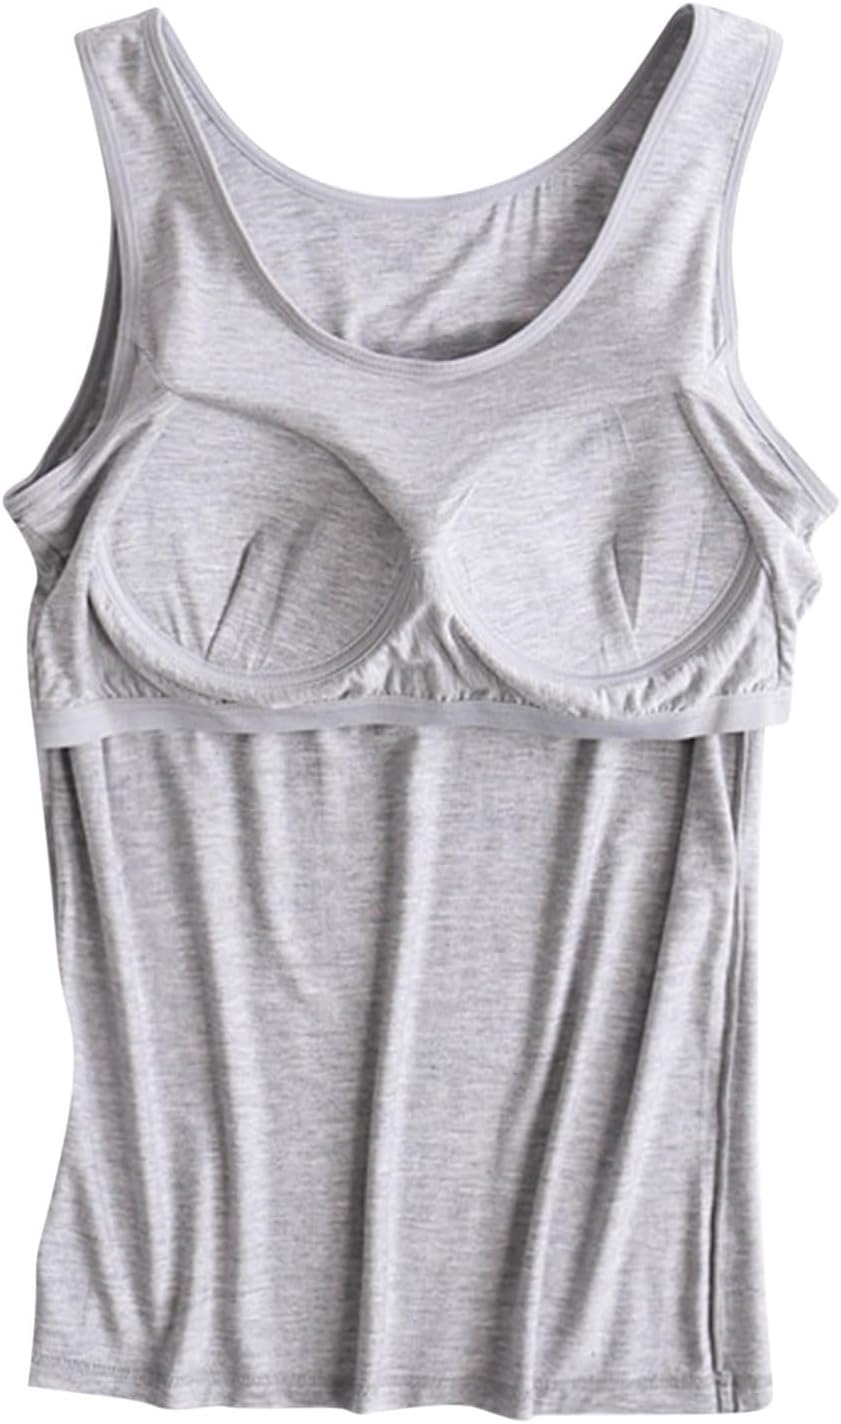 Womens Tank Tops with Built in Bras Padded Basic Solid … - Little River ...